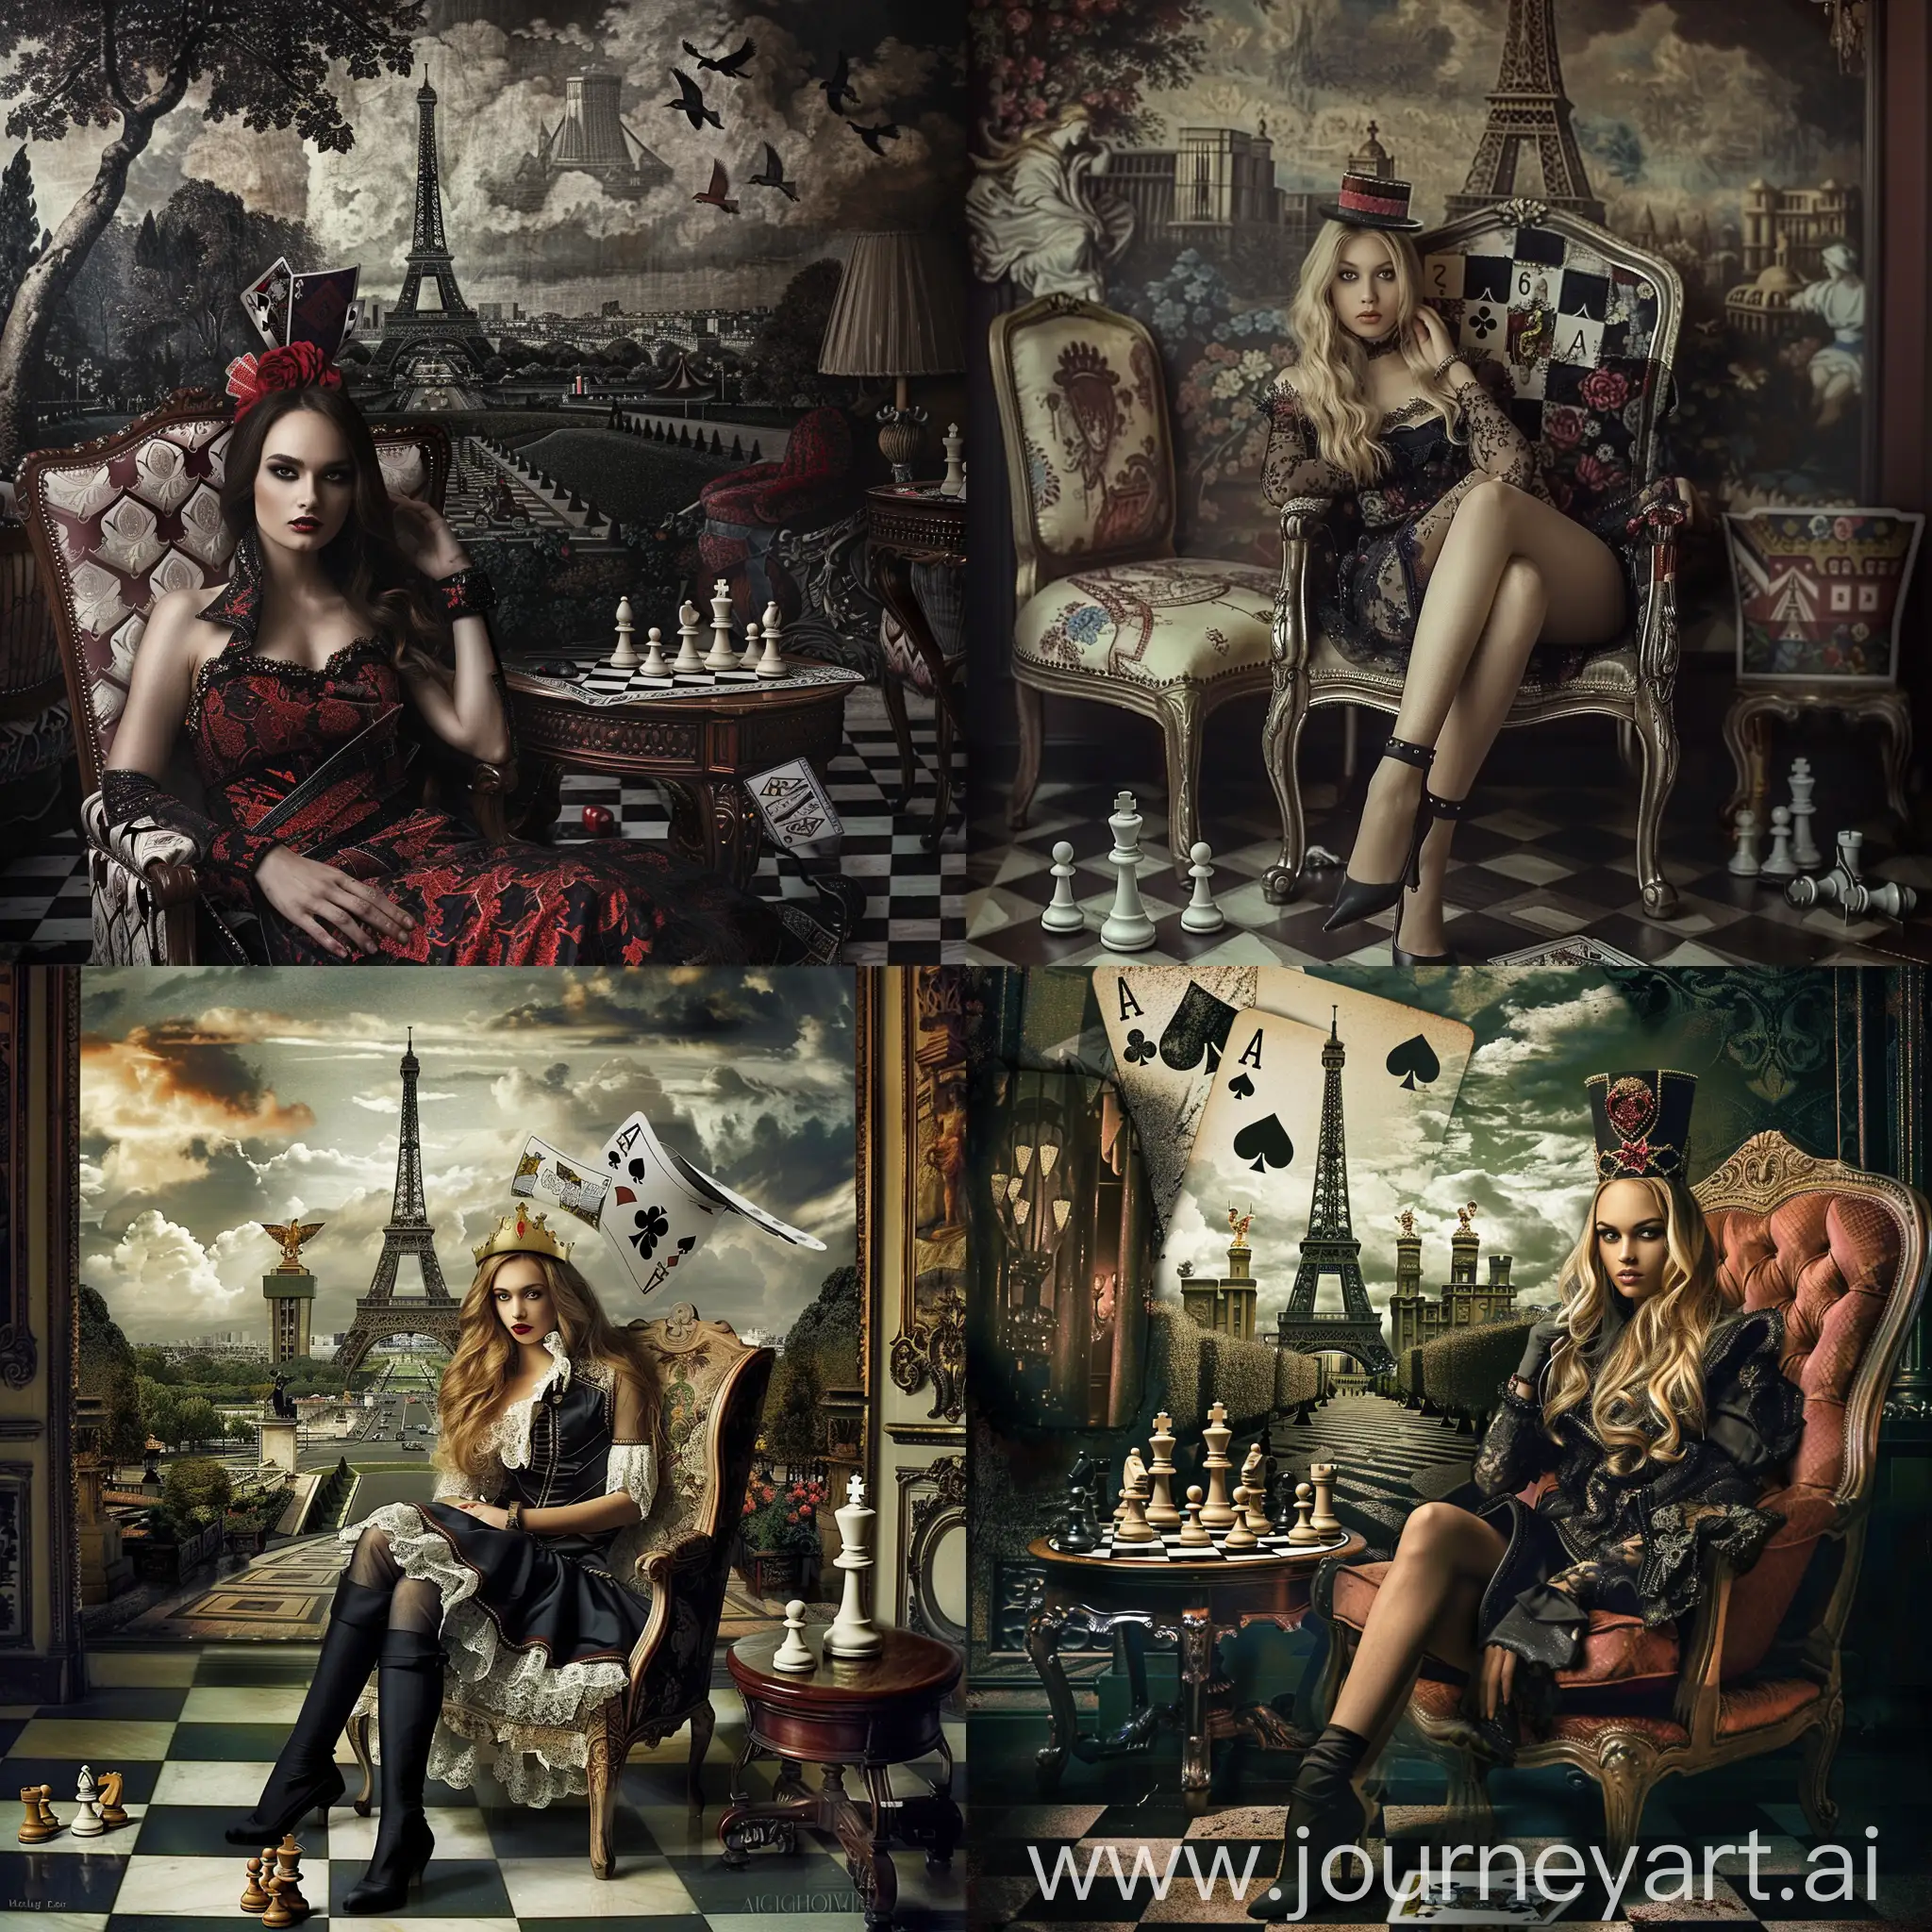 Elegant-Fashion-Photography-Girl-in-Chair-with-Chess-and-Poker-Motifs